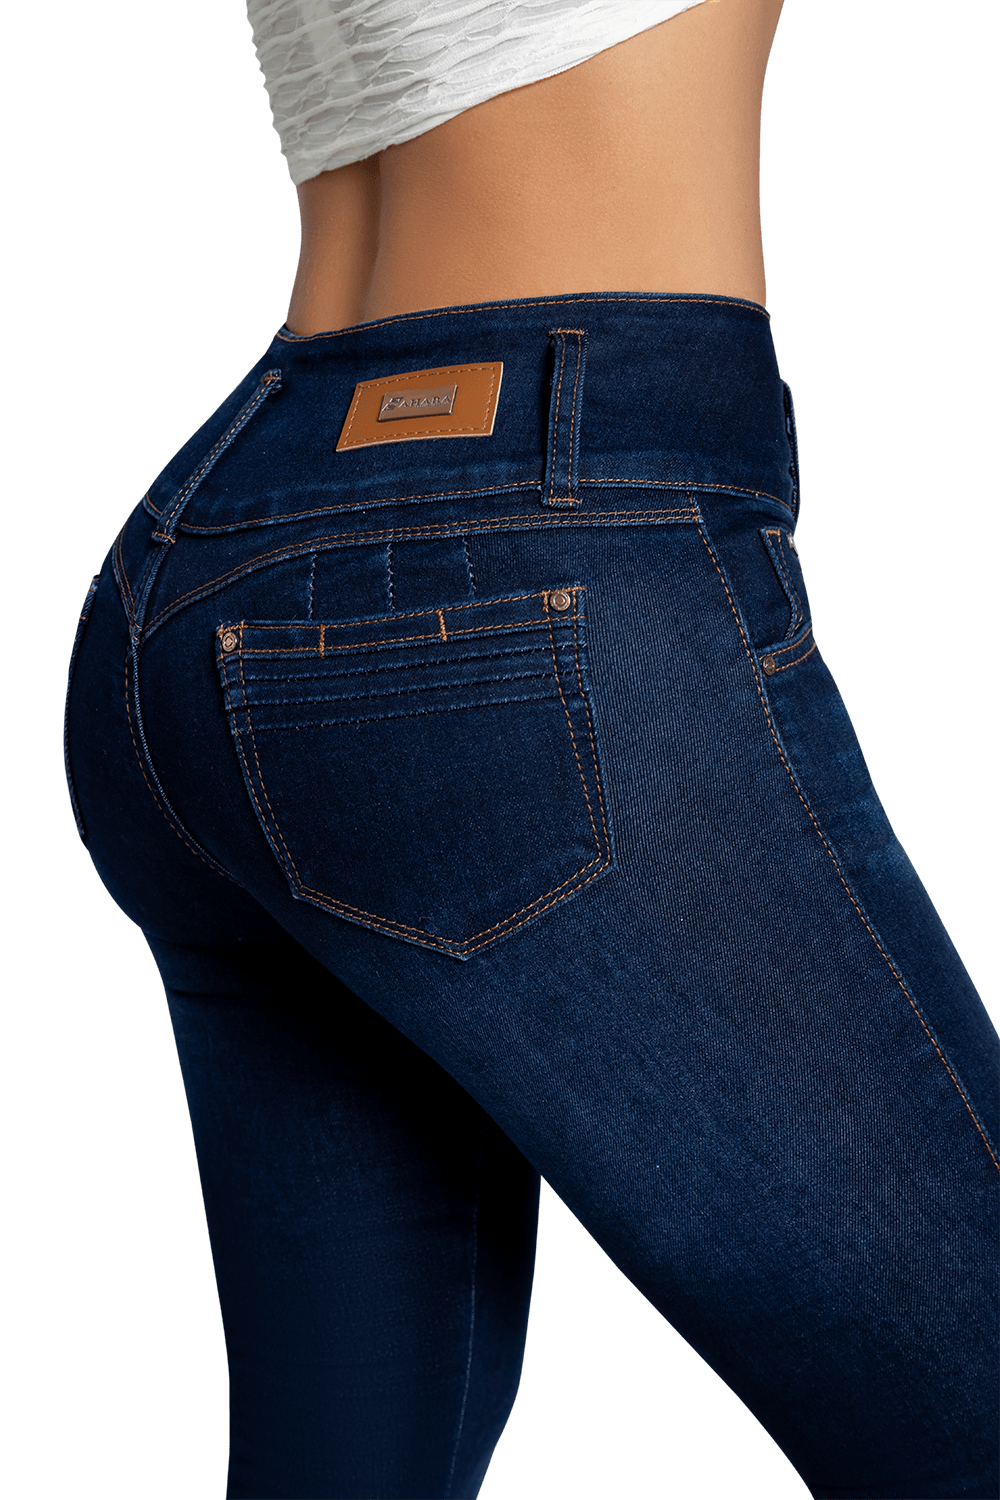 Ily Clothing Jeans Push Up Jean